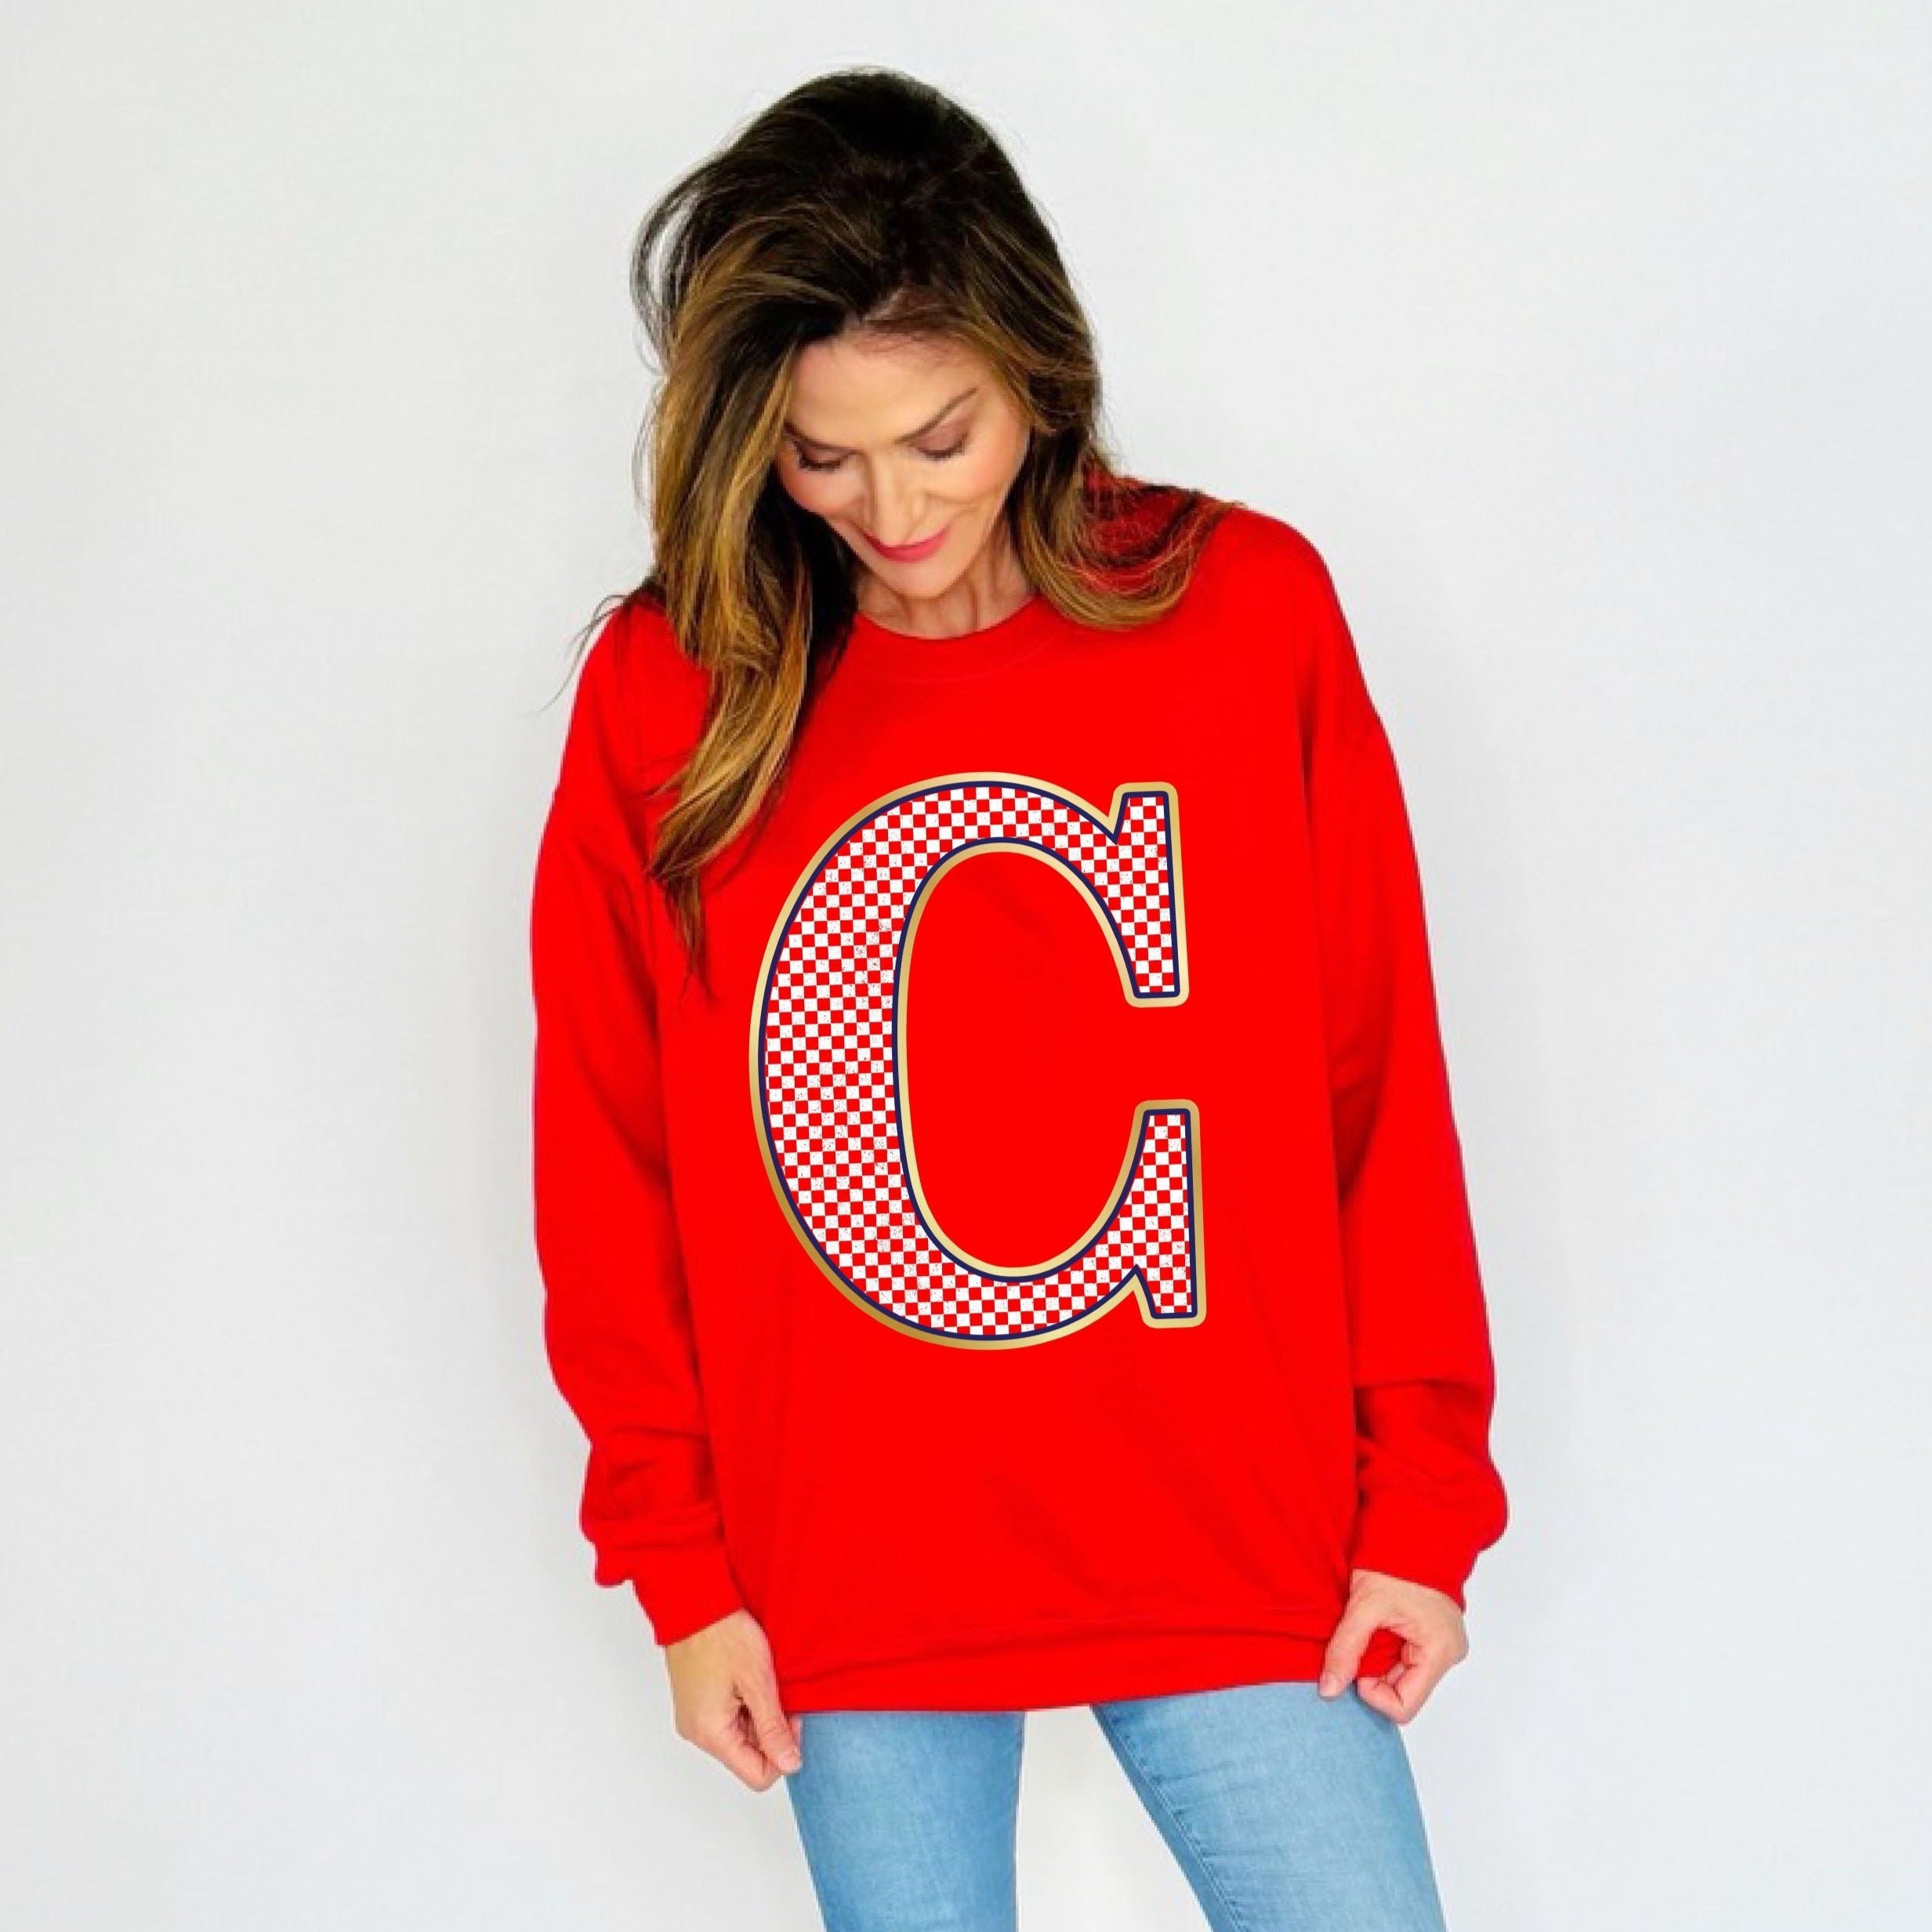 Cleveland Inspired Checkered Youth & Adult Sweatshirt